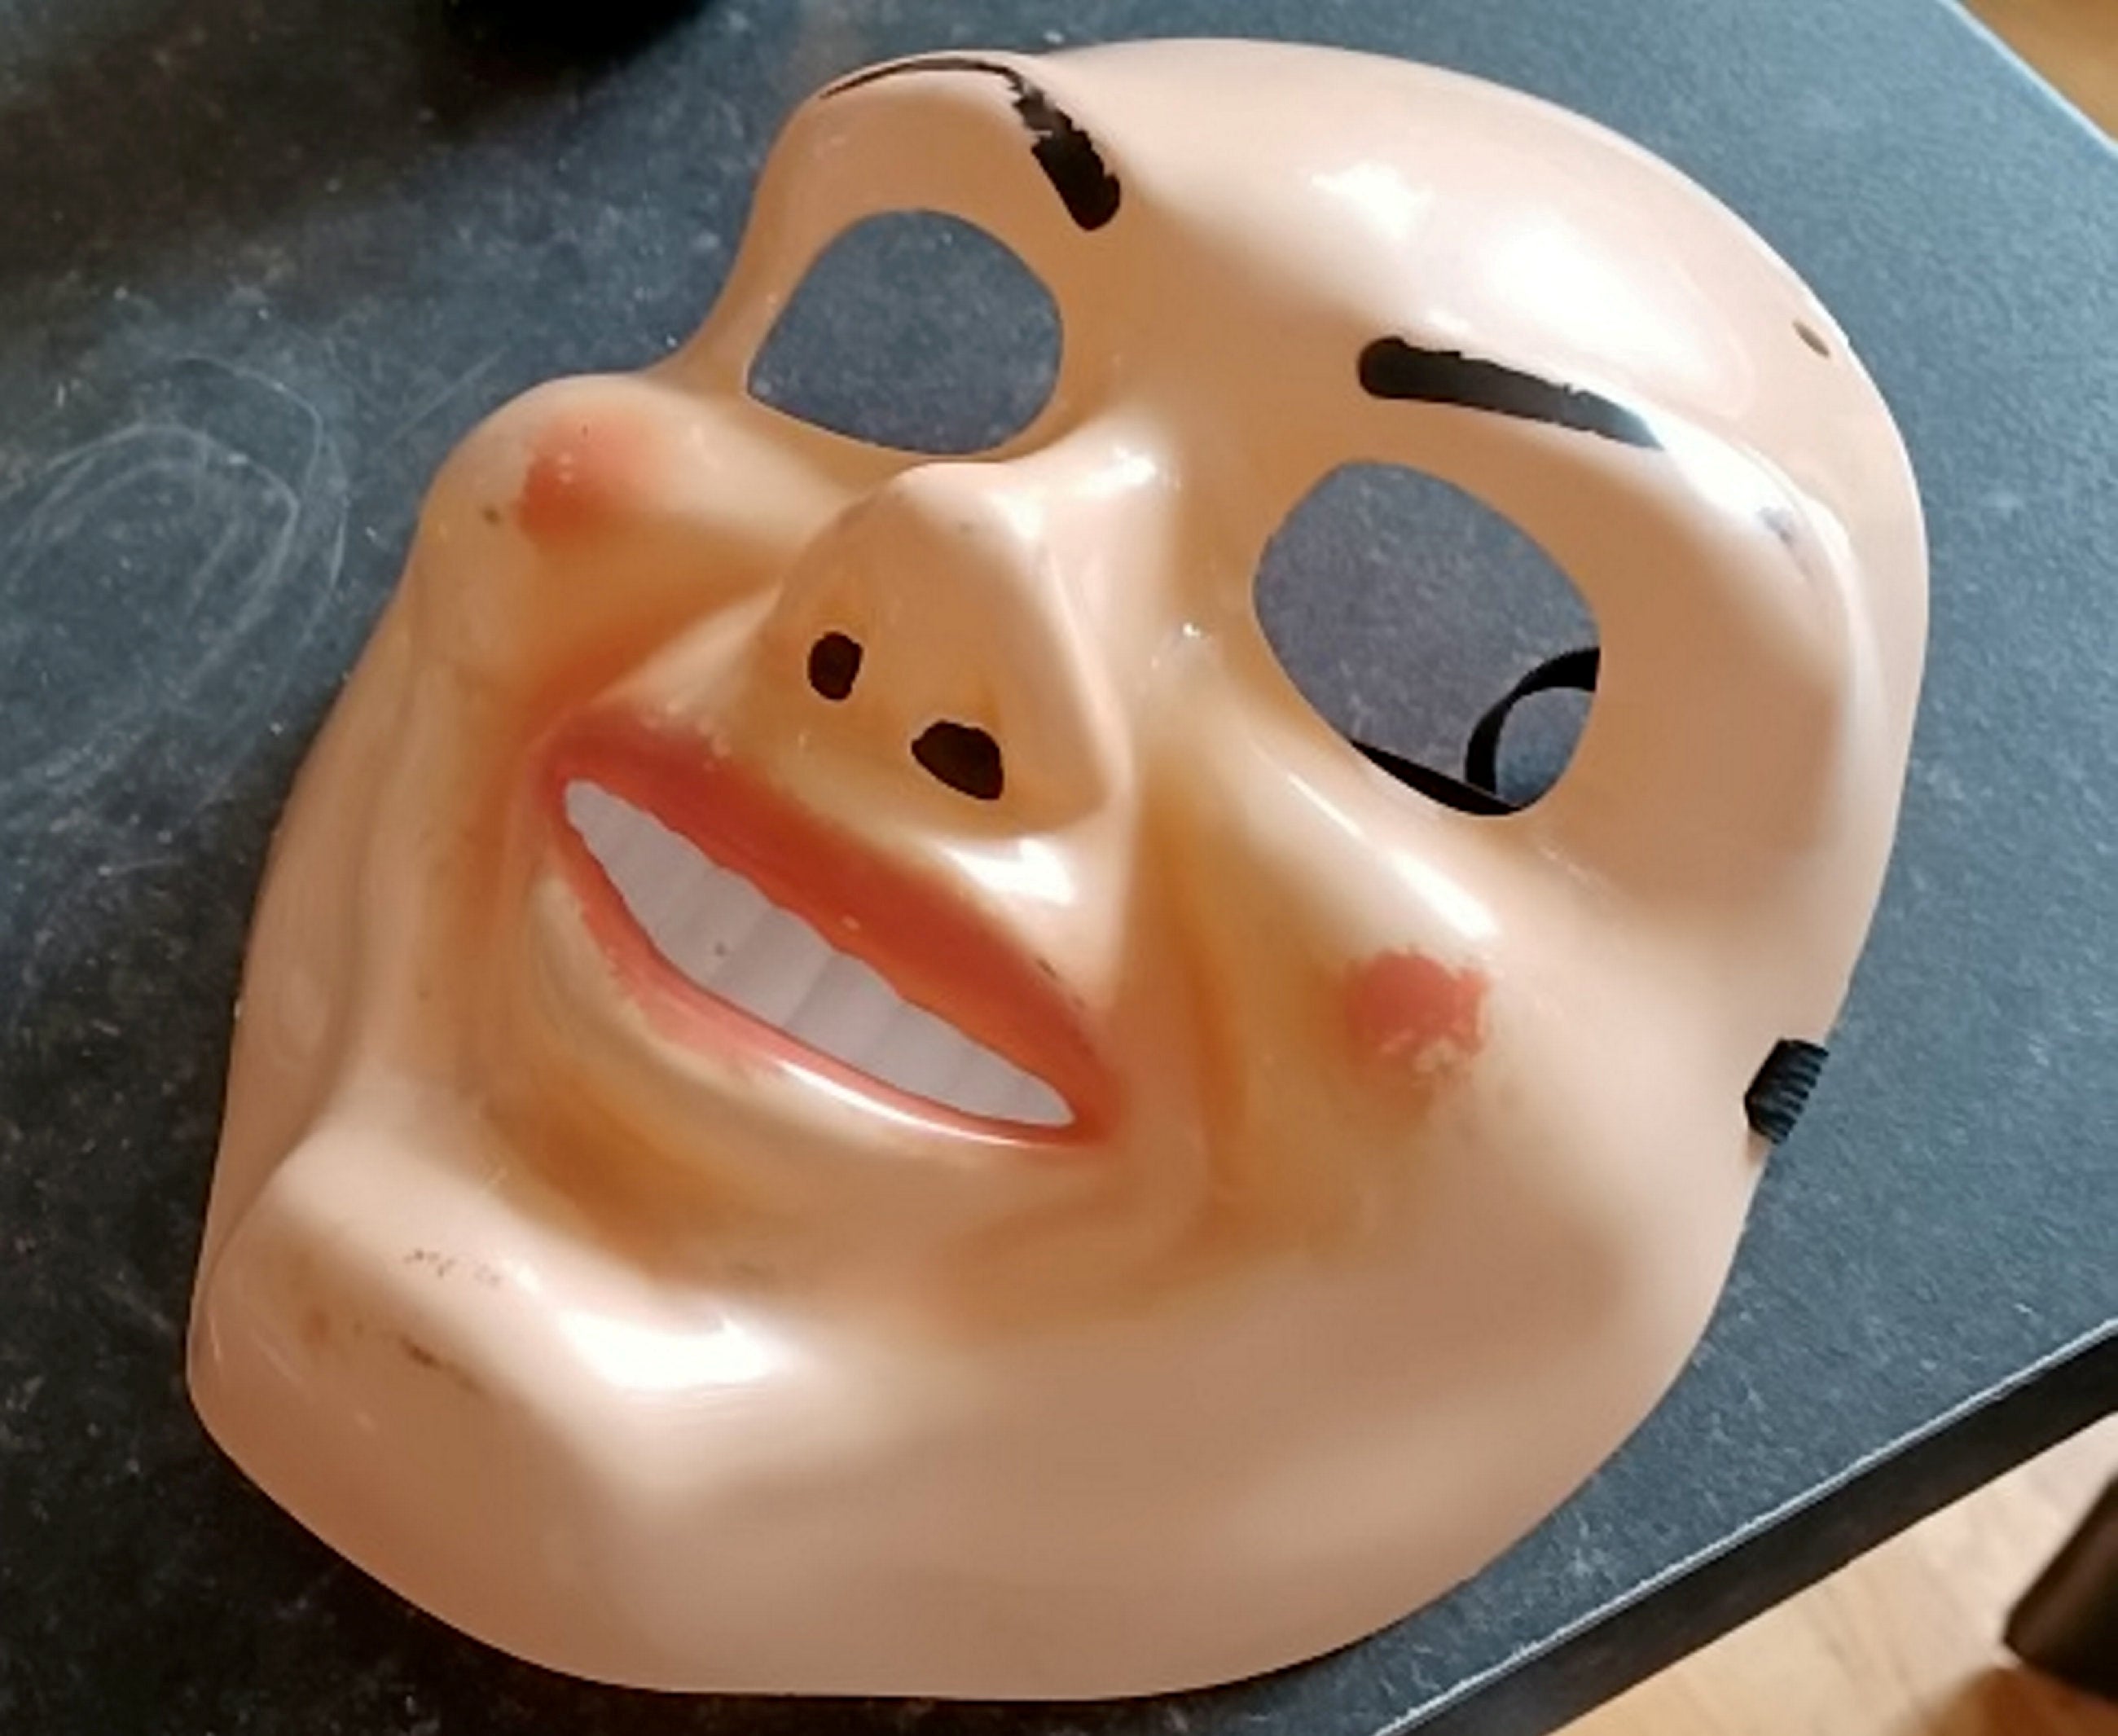 Facemask found at the house